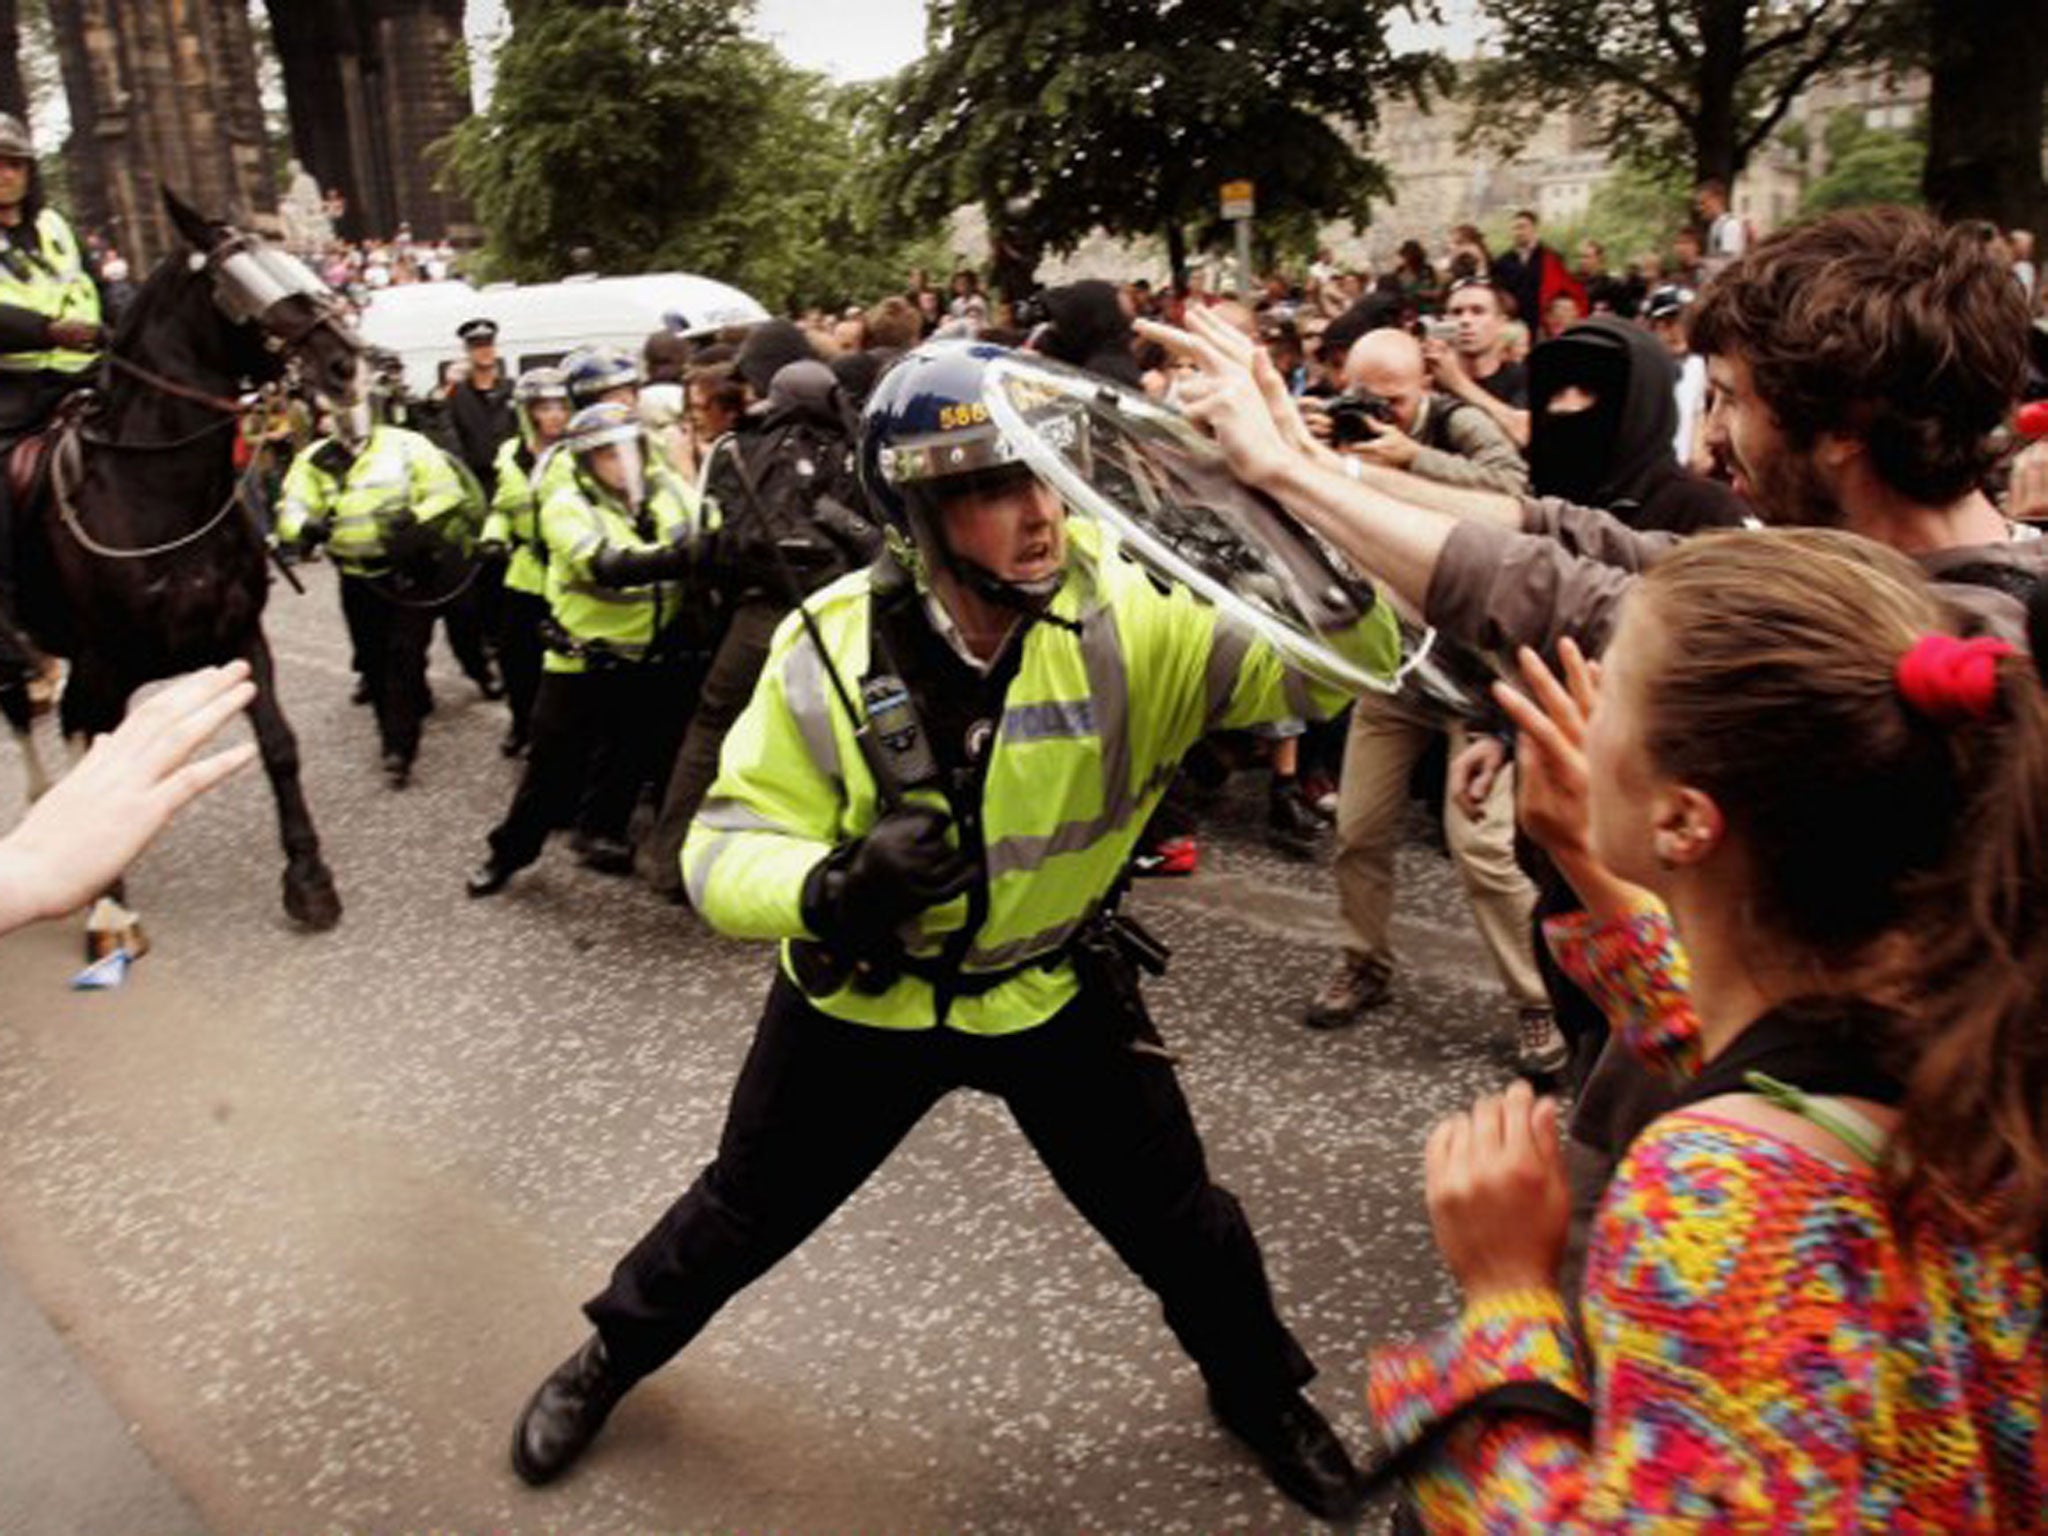 Police clash with protesters in Edinburgh on 4 July 2005 ahead of the Gleneagles summit